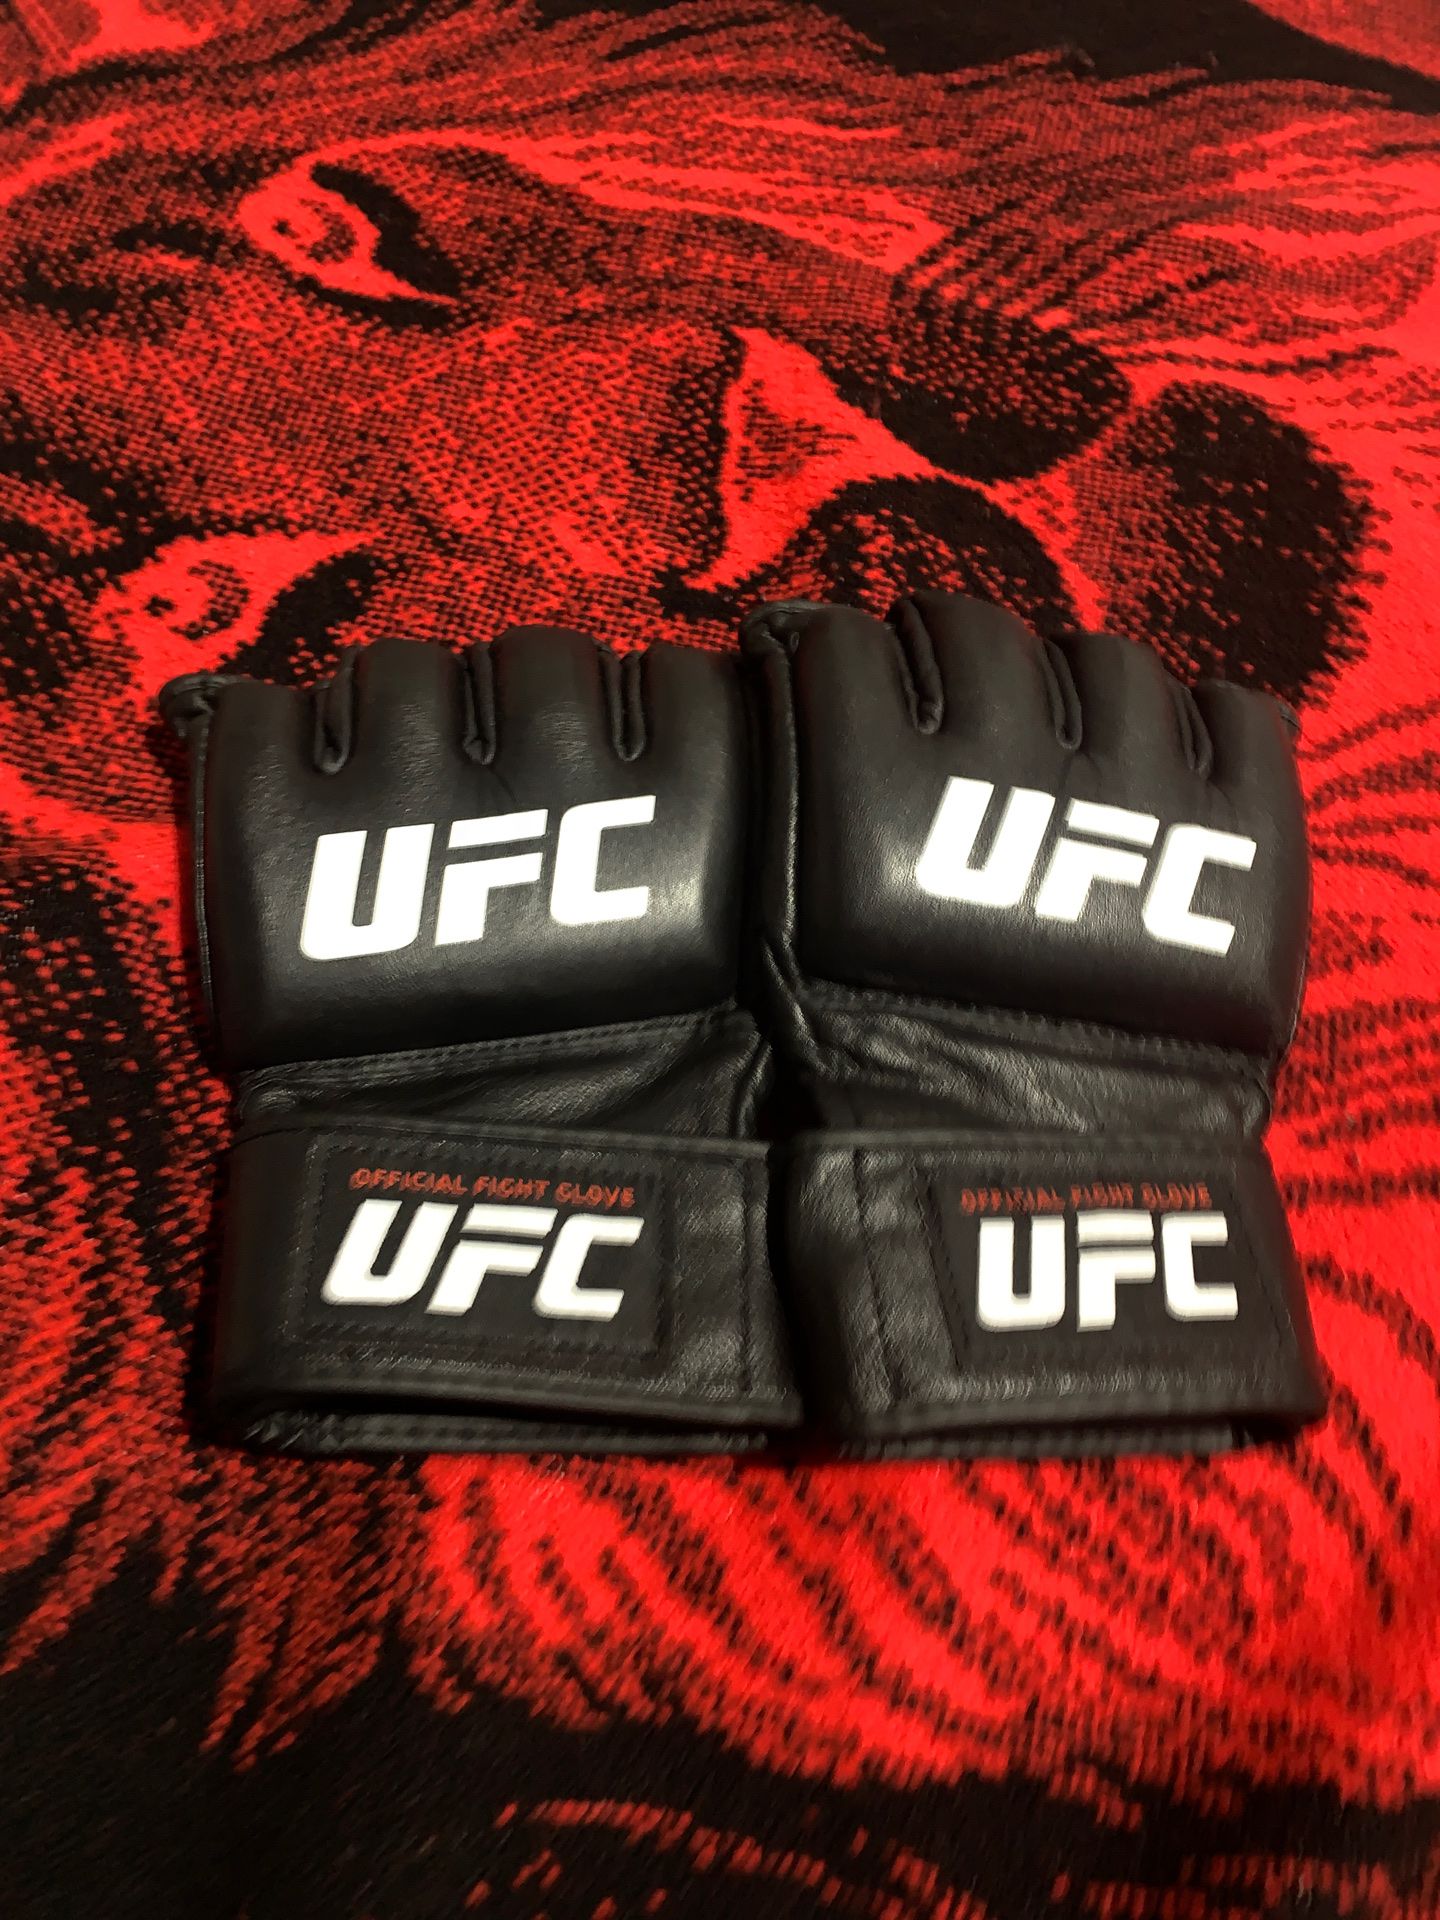 Ufc official fight gloves